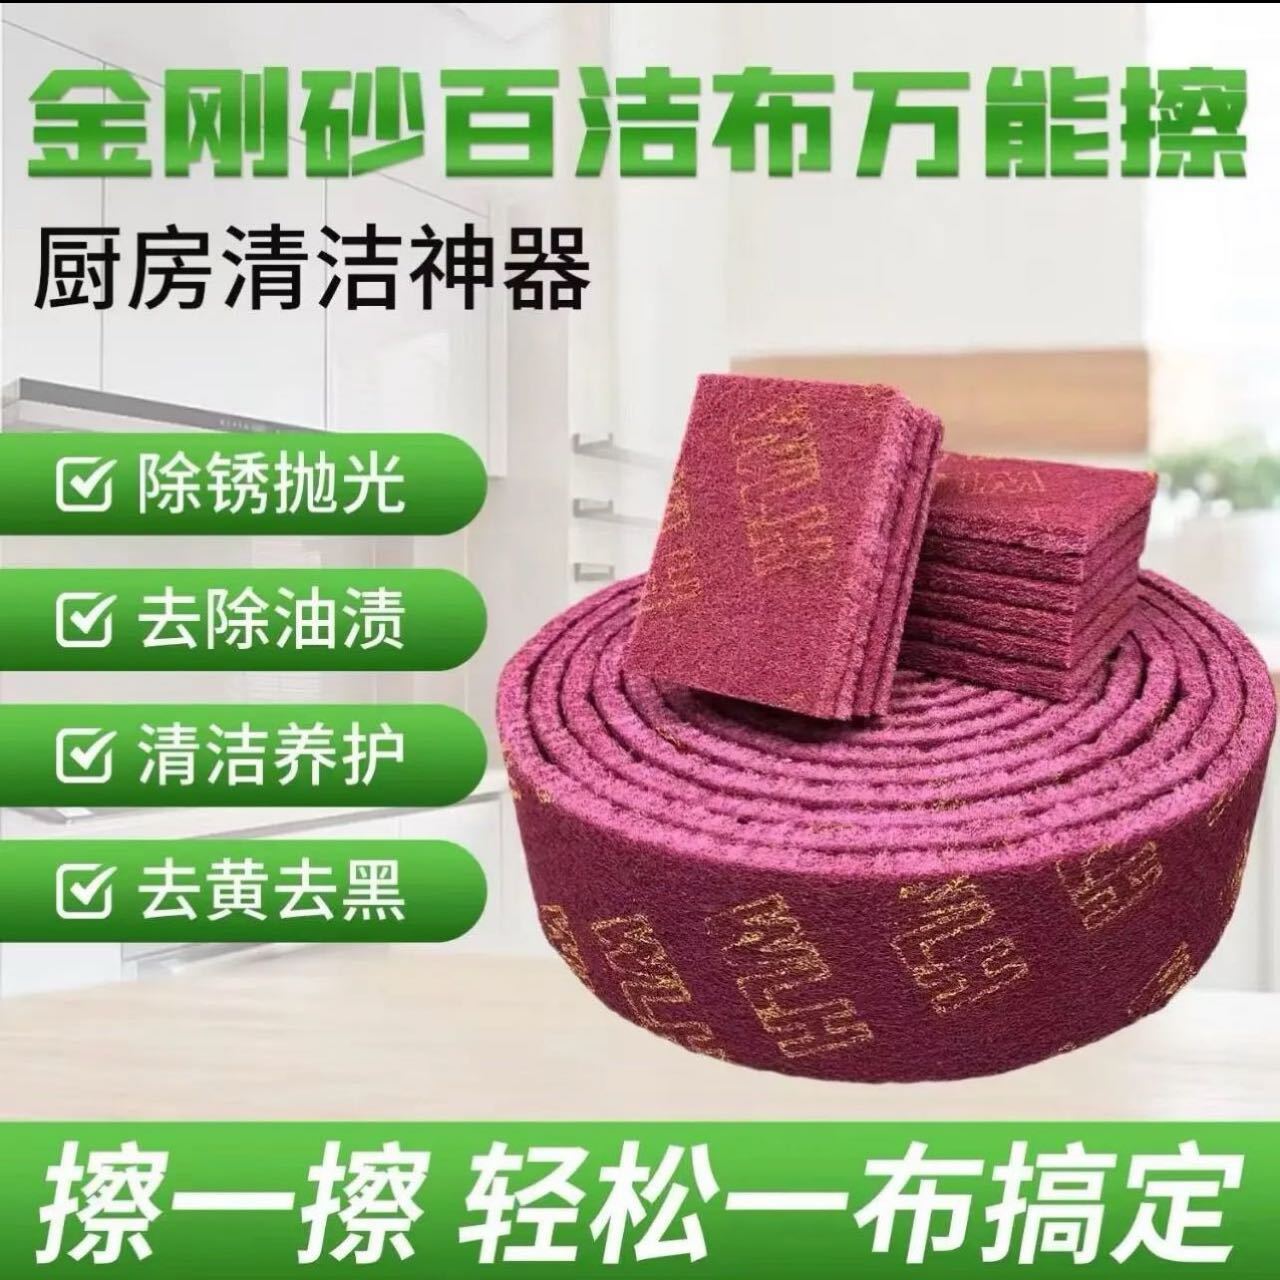 Silicon Carbide Scouring Pad Kitchen Brush Pot Helper Multi-Functional Household Polishing Cleaning Decontamination Descaling Rust Removal Cleaning Brush